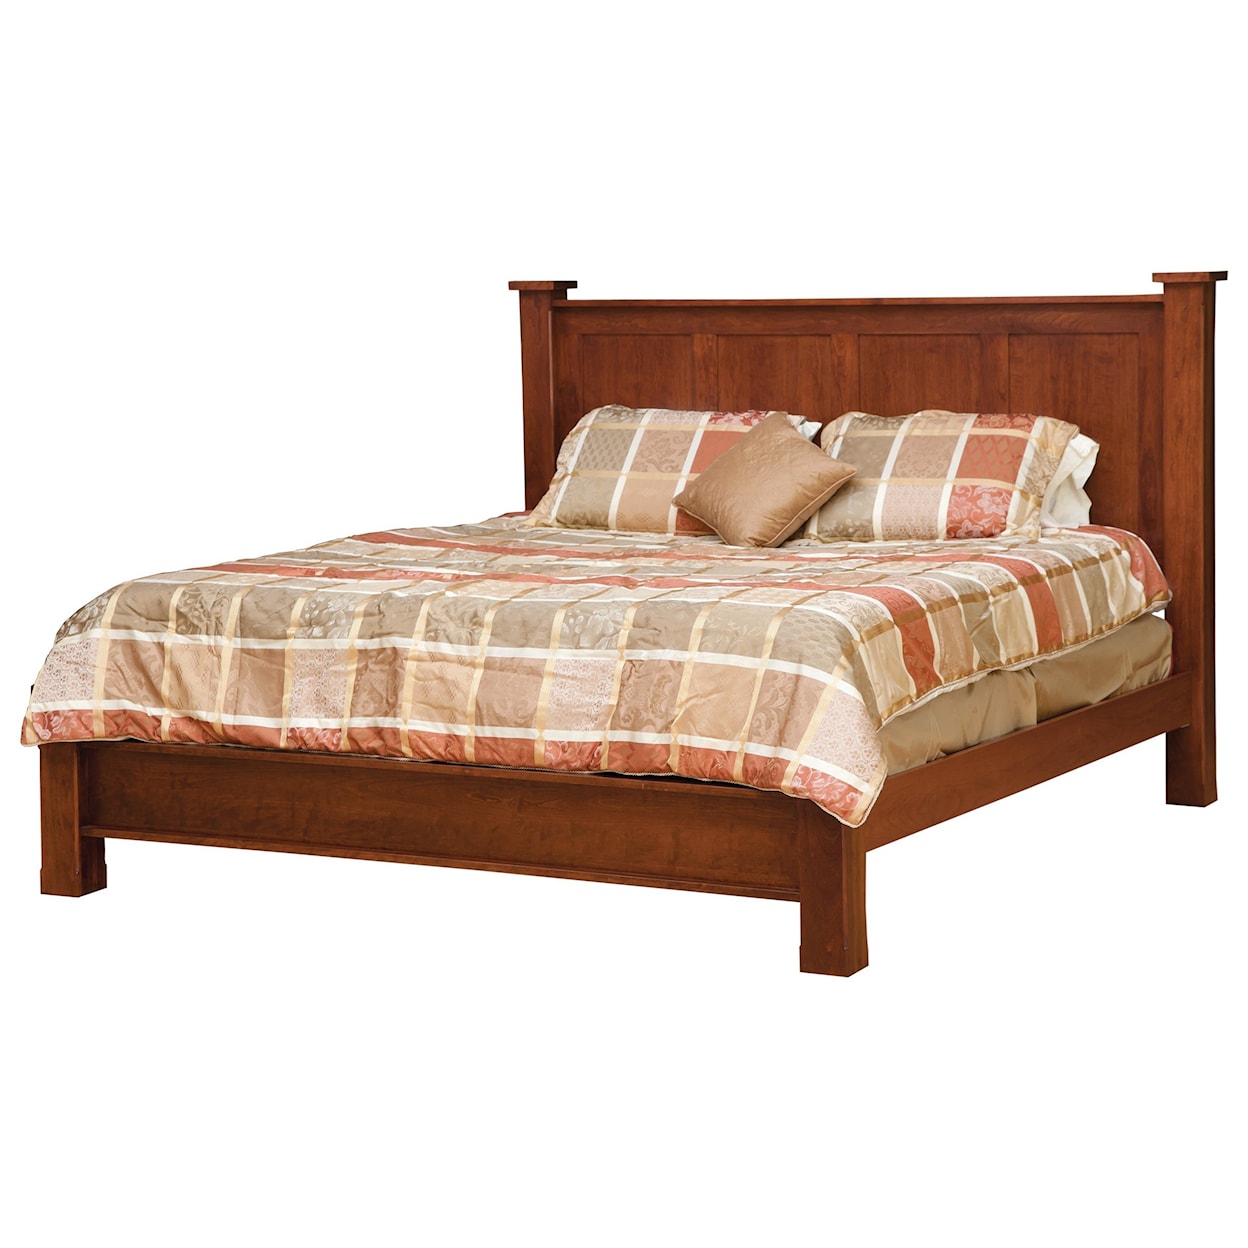 Daniel's Amish Treasure Queen Bed with Low Footboard